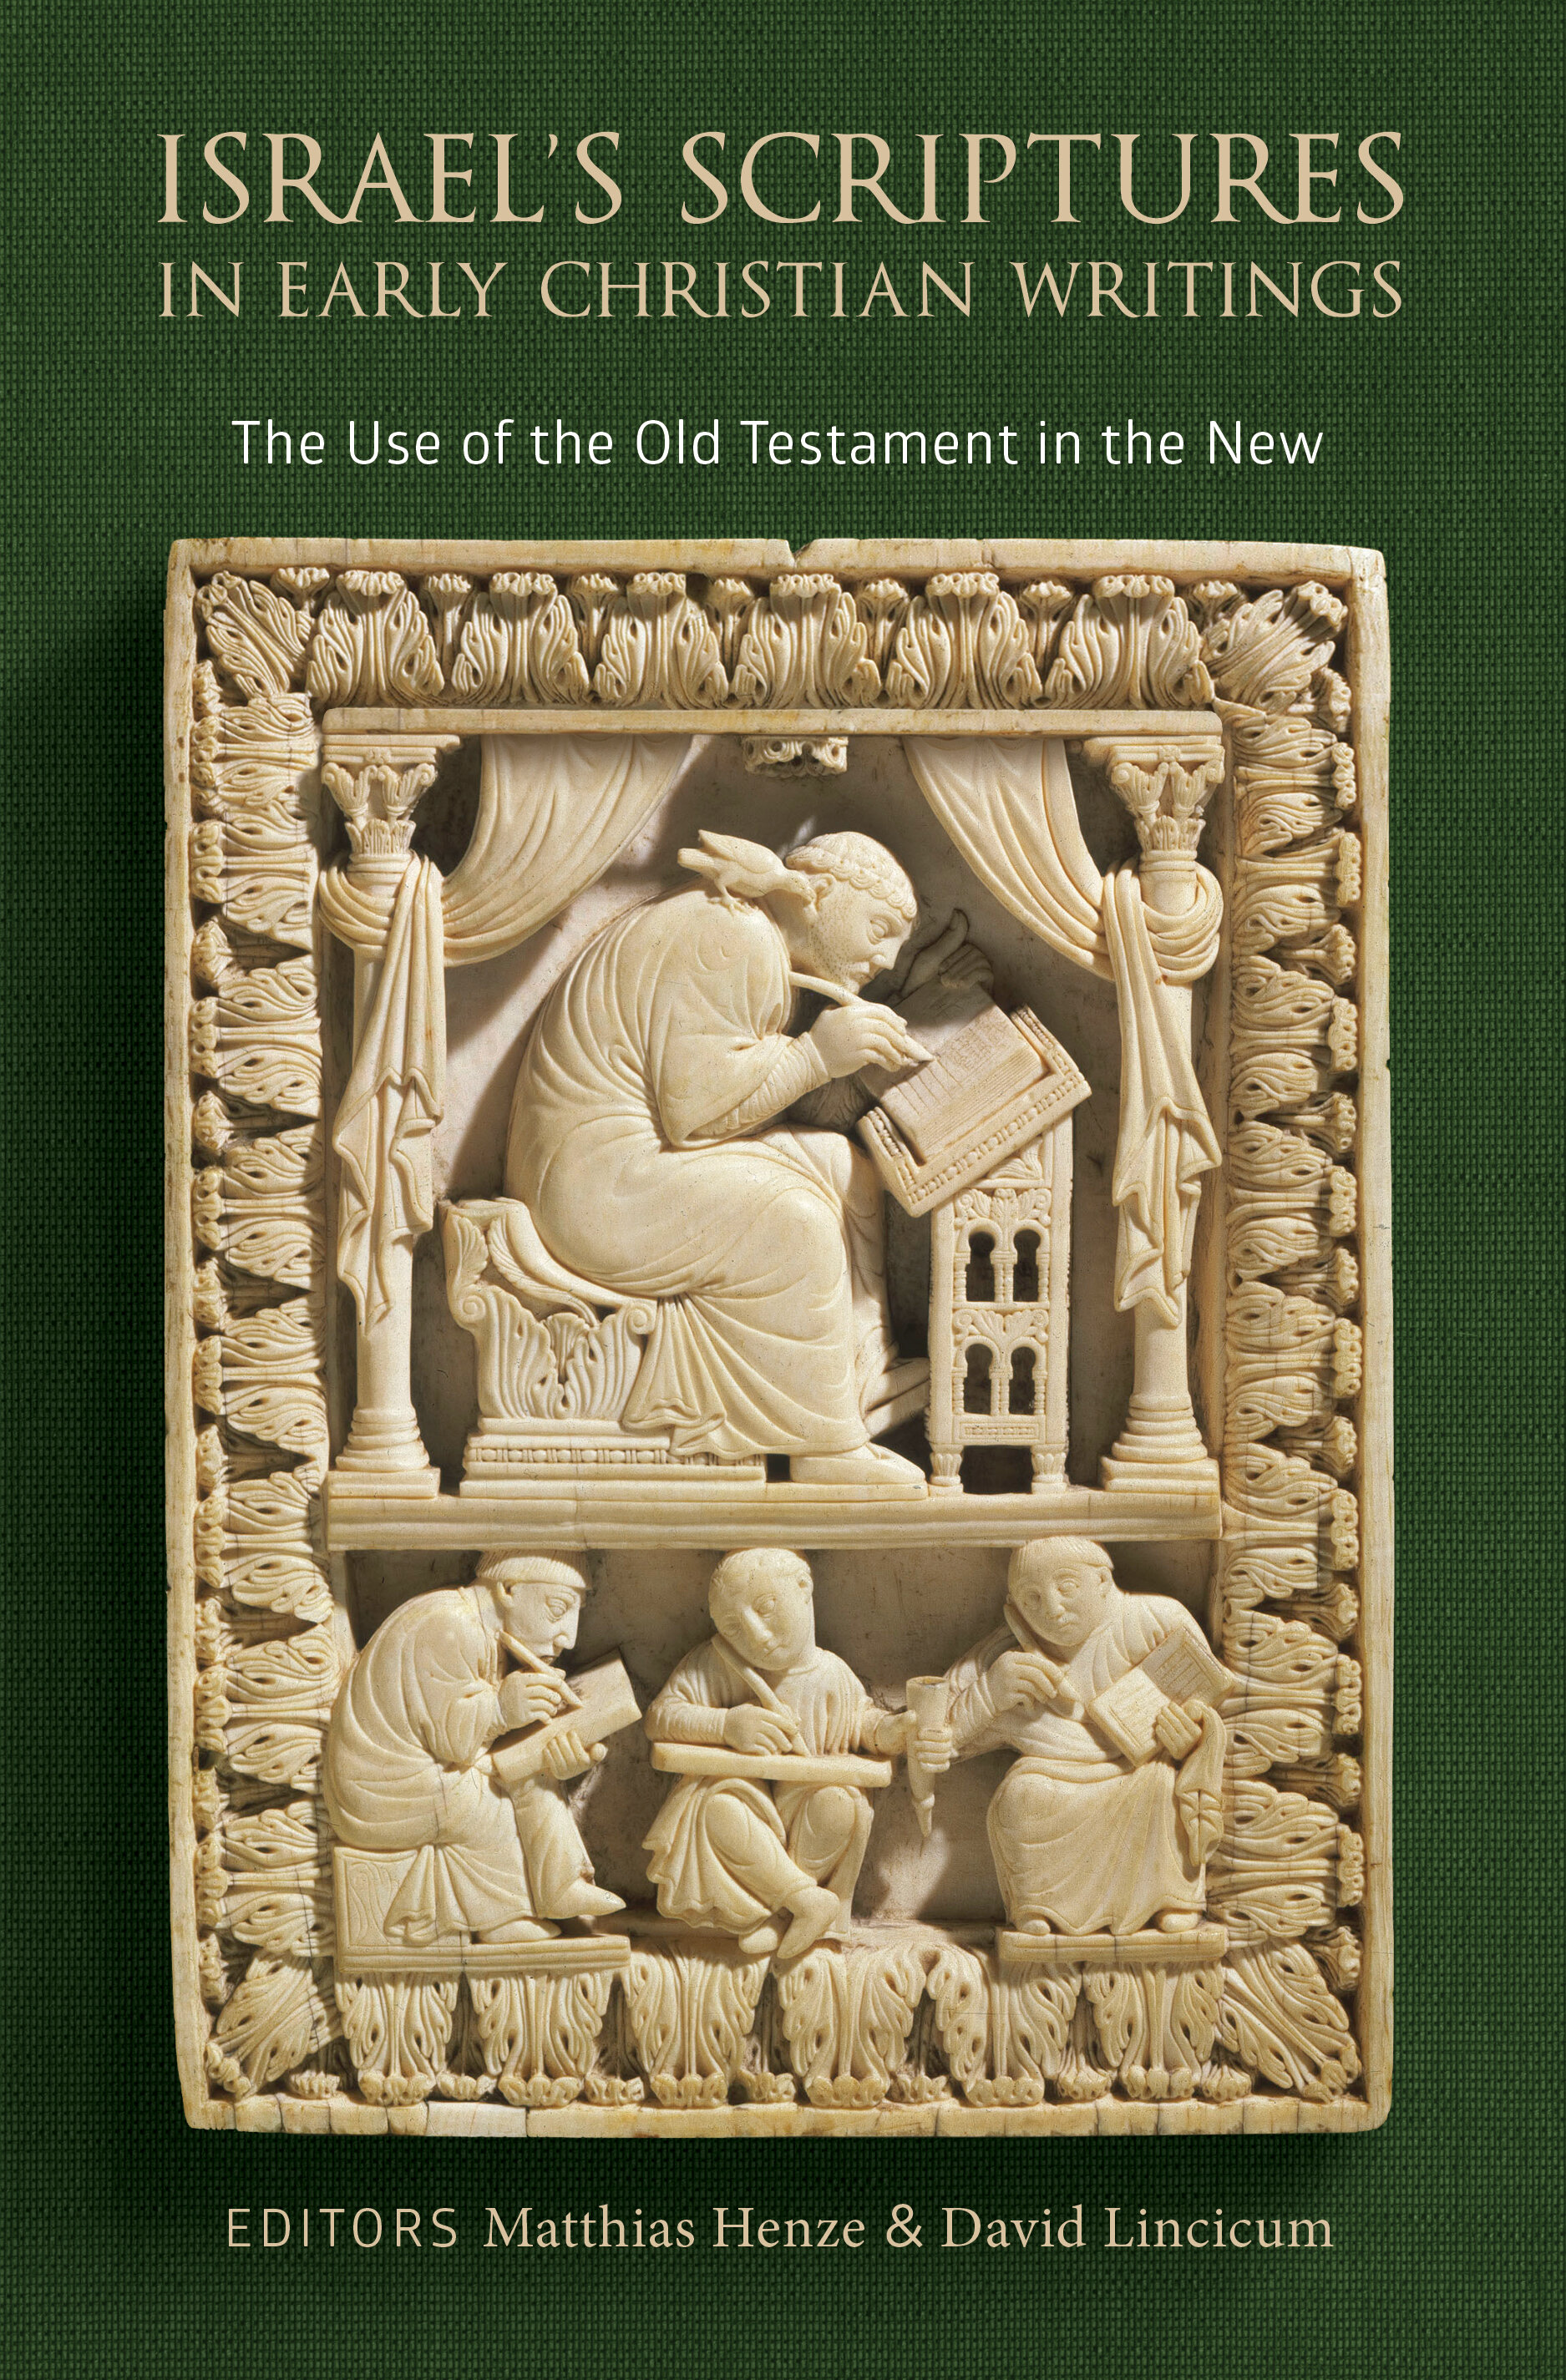 Israel’s Scriptures in Early Christian Writings: The Use of the Old Testament in the New